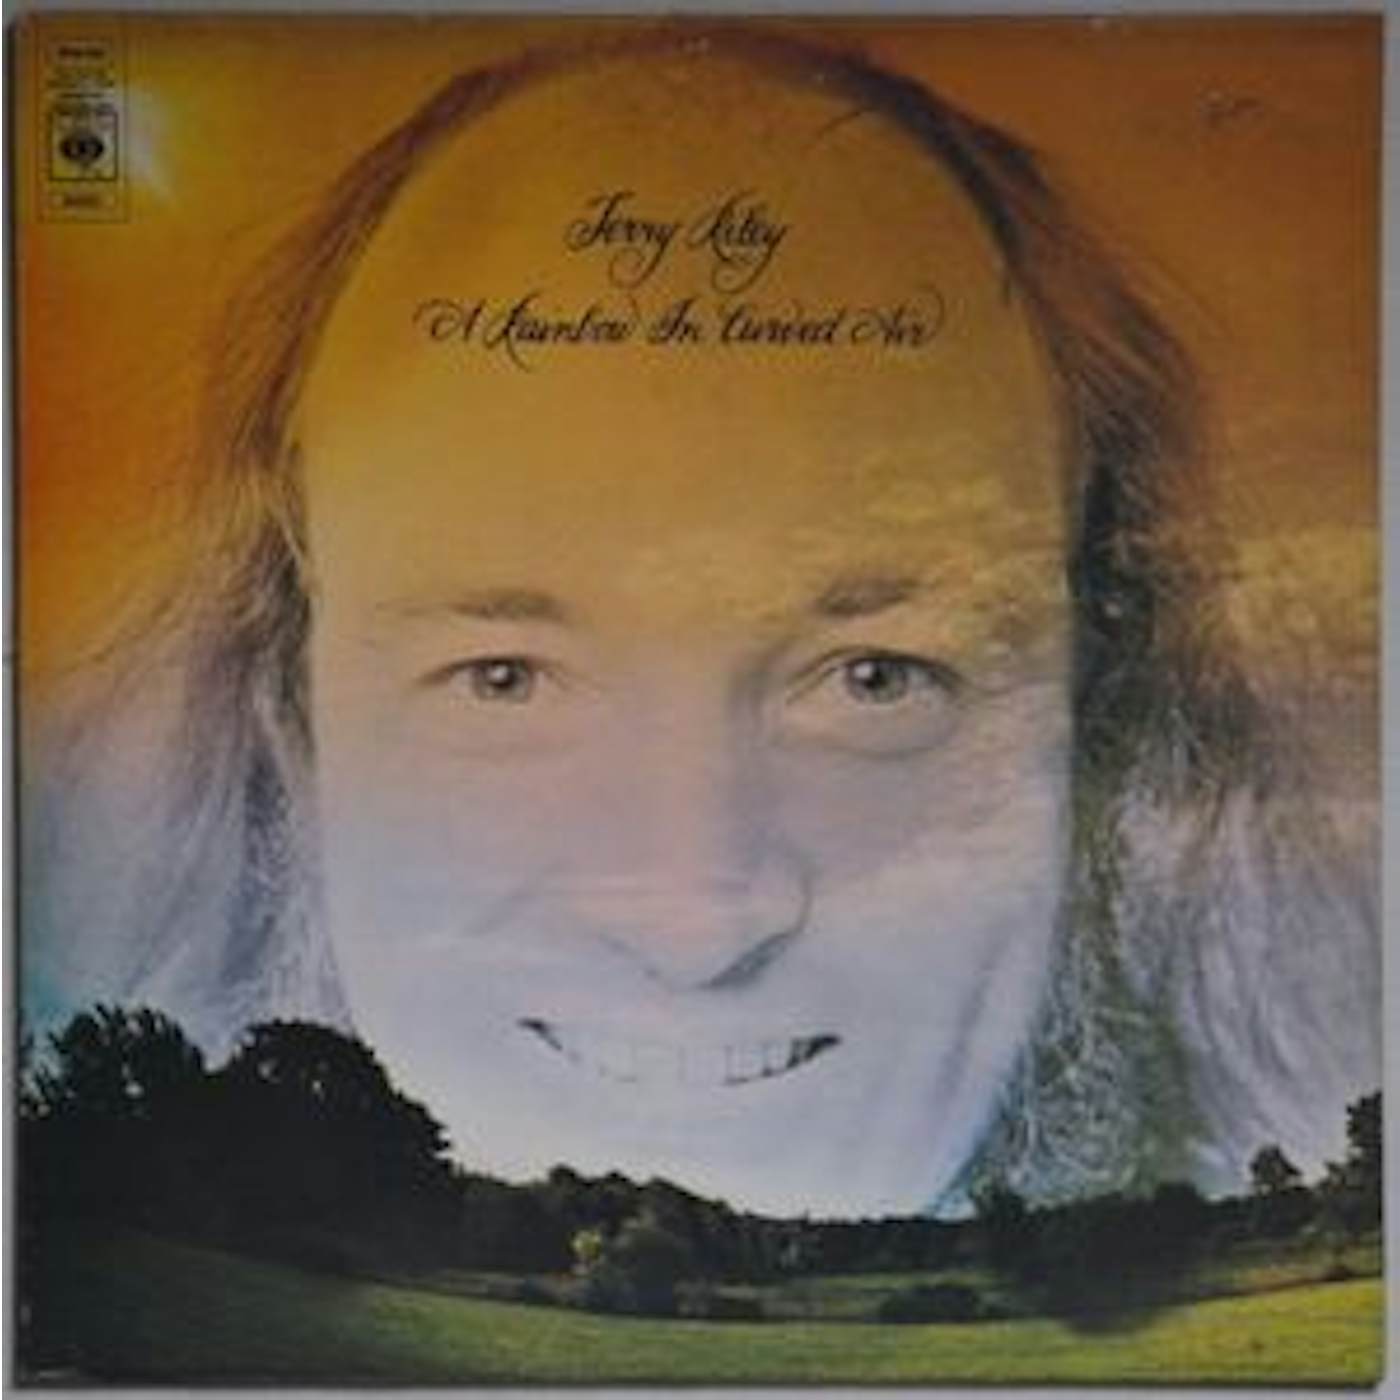 Terry Riley RAINBOW IN CURVED AIR: REMASTERED Vinyl Record